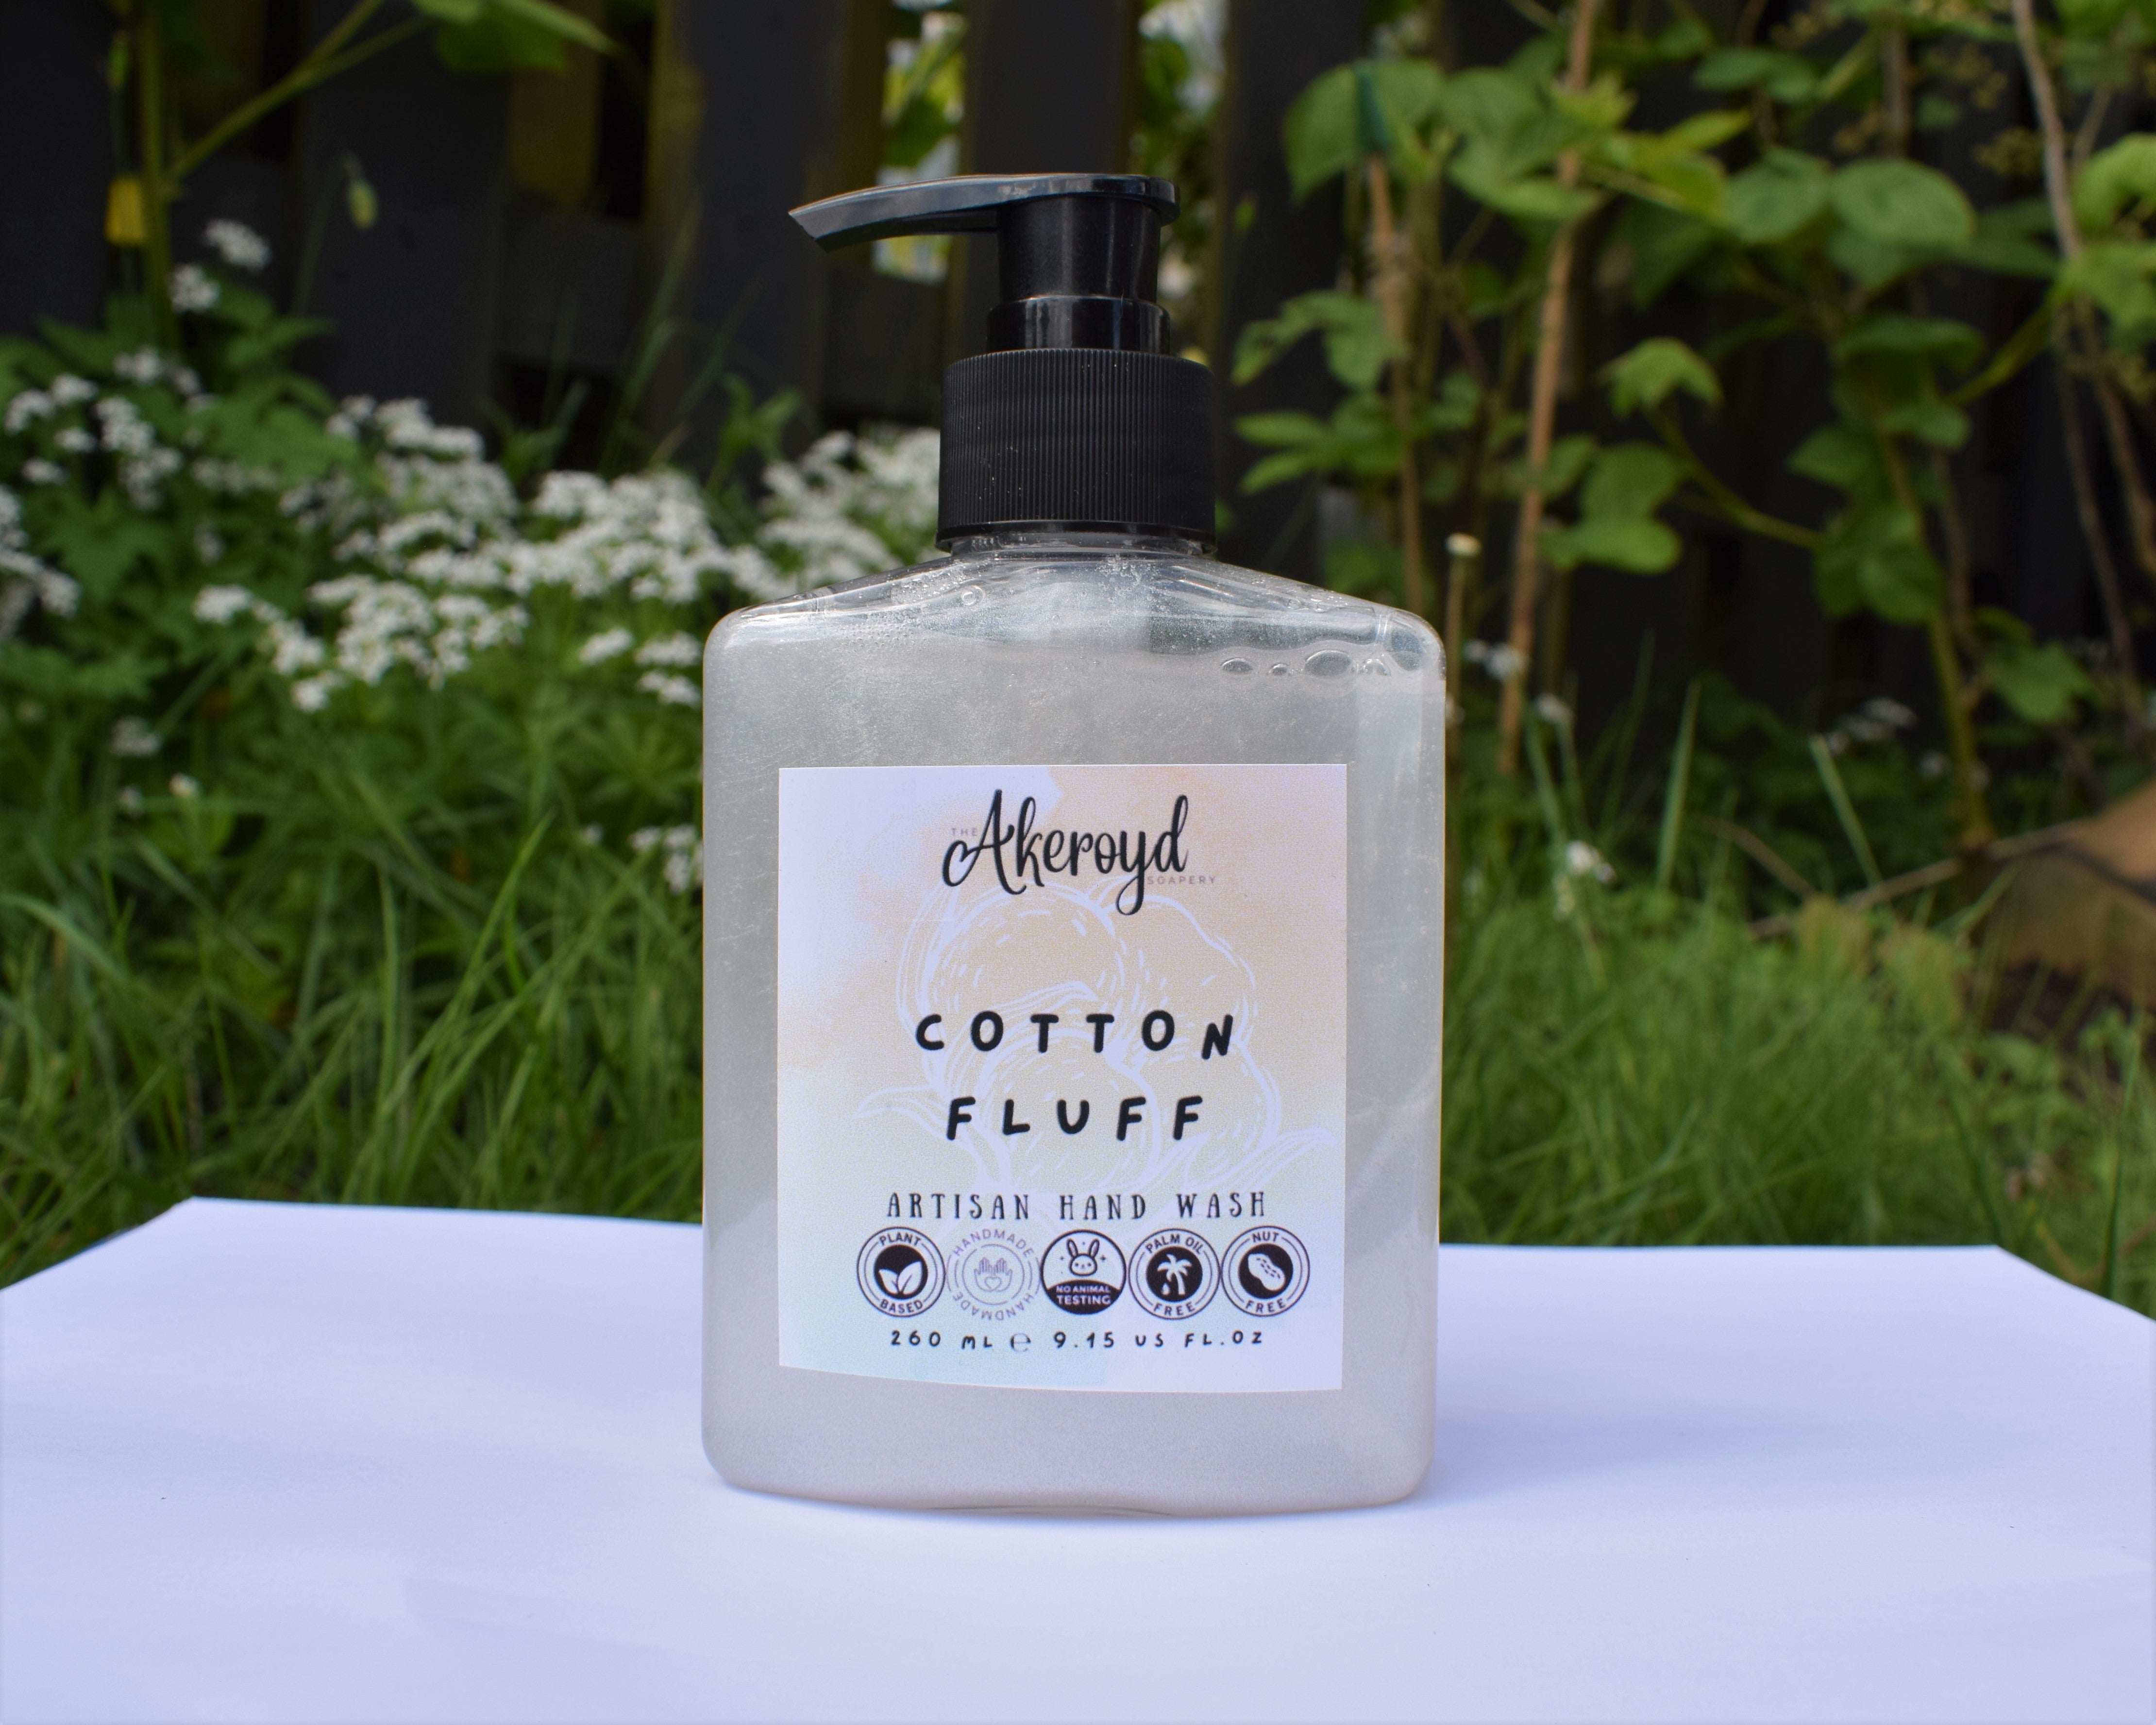 Cotton Fluff Hand Wash – The Akeroyd Soapery